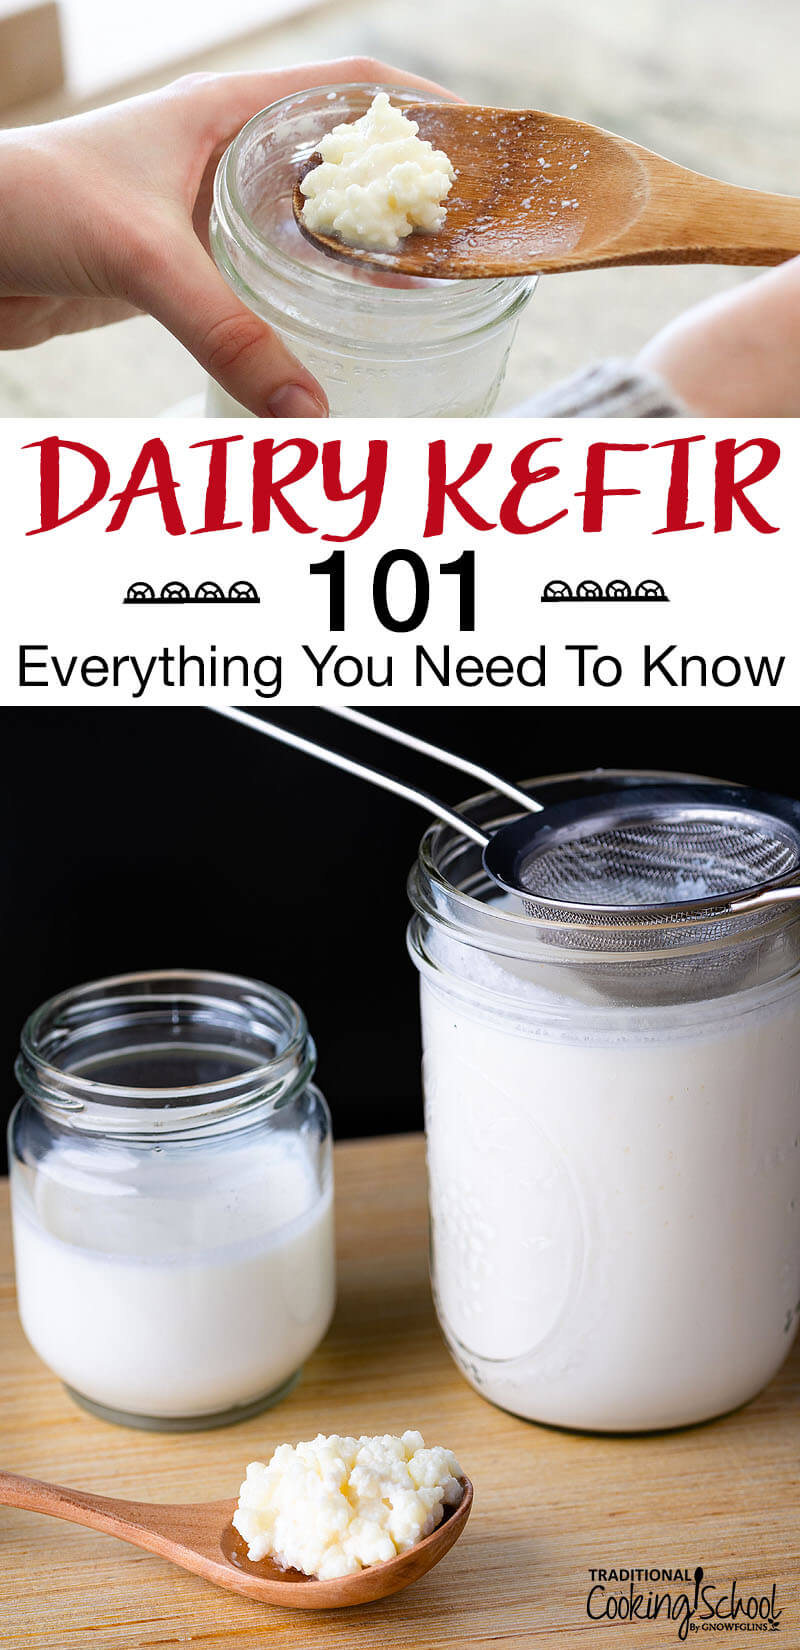 Photo collage of straining kefir grains out of finished batches of kefir using a wooden spoon and stainless steel strainer. Text overlay says: "Dairy Kefir 101: Everything You Need To Know"